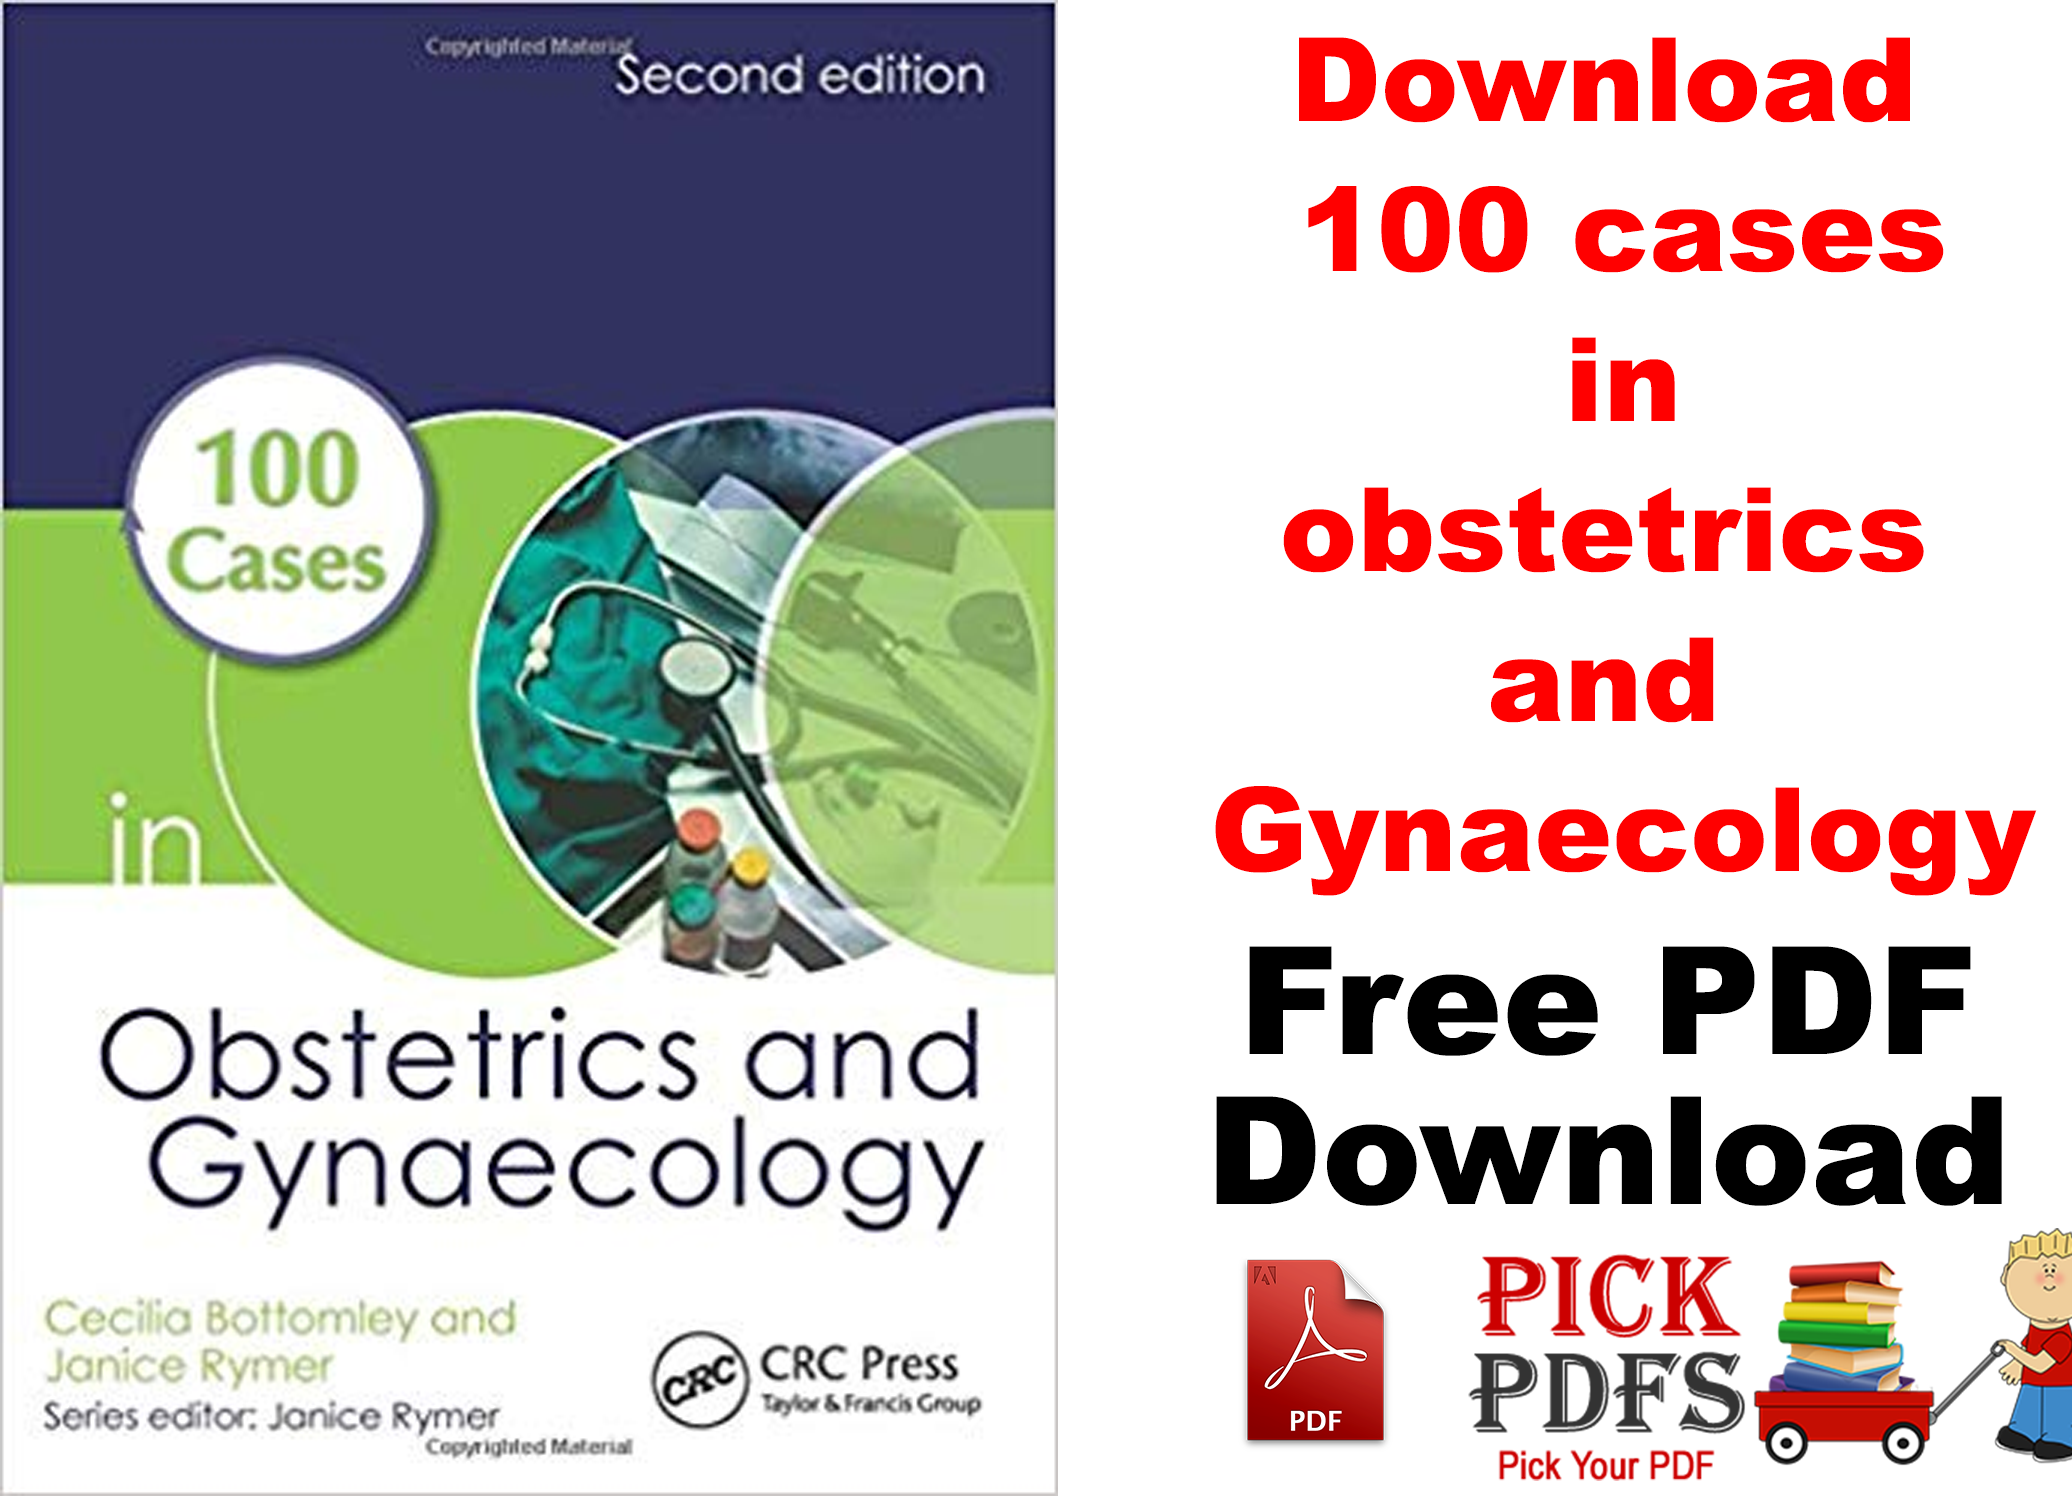 https://pickpdfs.com/download-100-cases-in-obstetrics-and-gynaecology-2nd-edition-free-pdf/